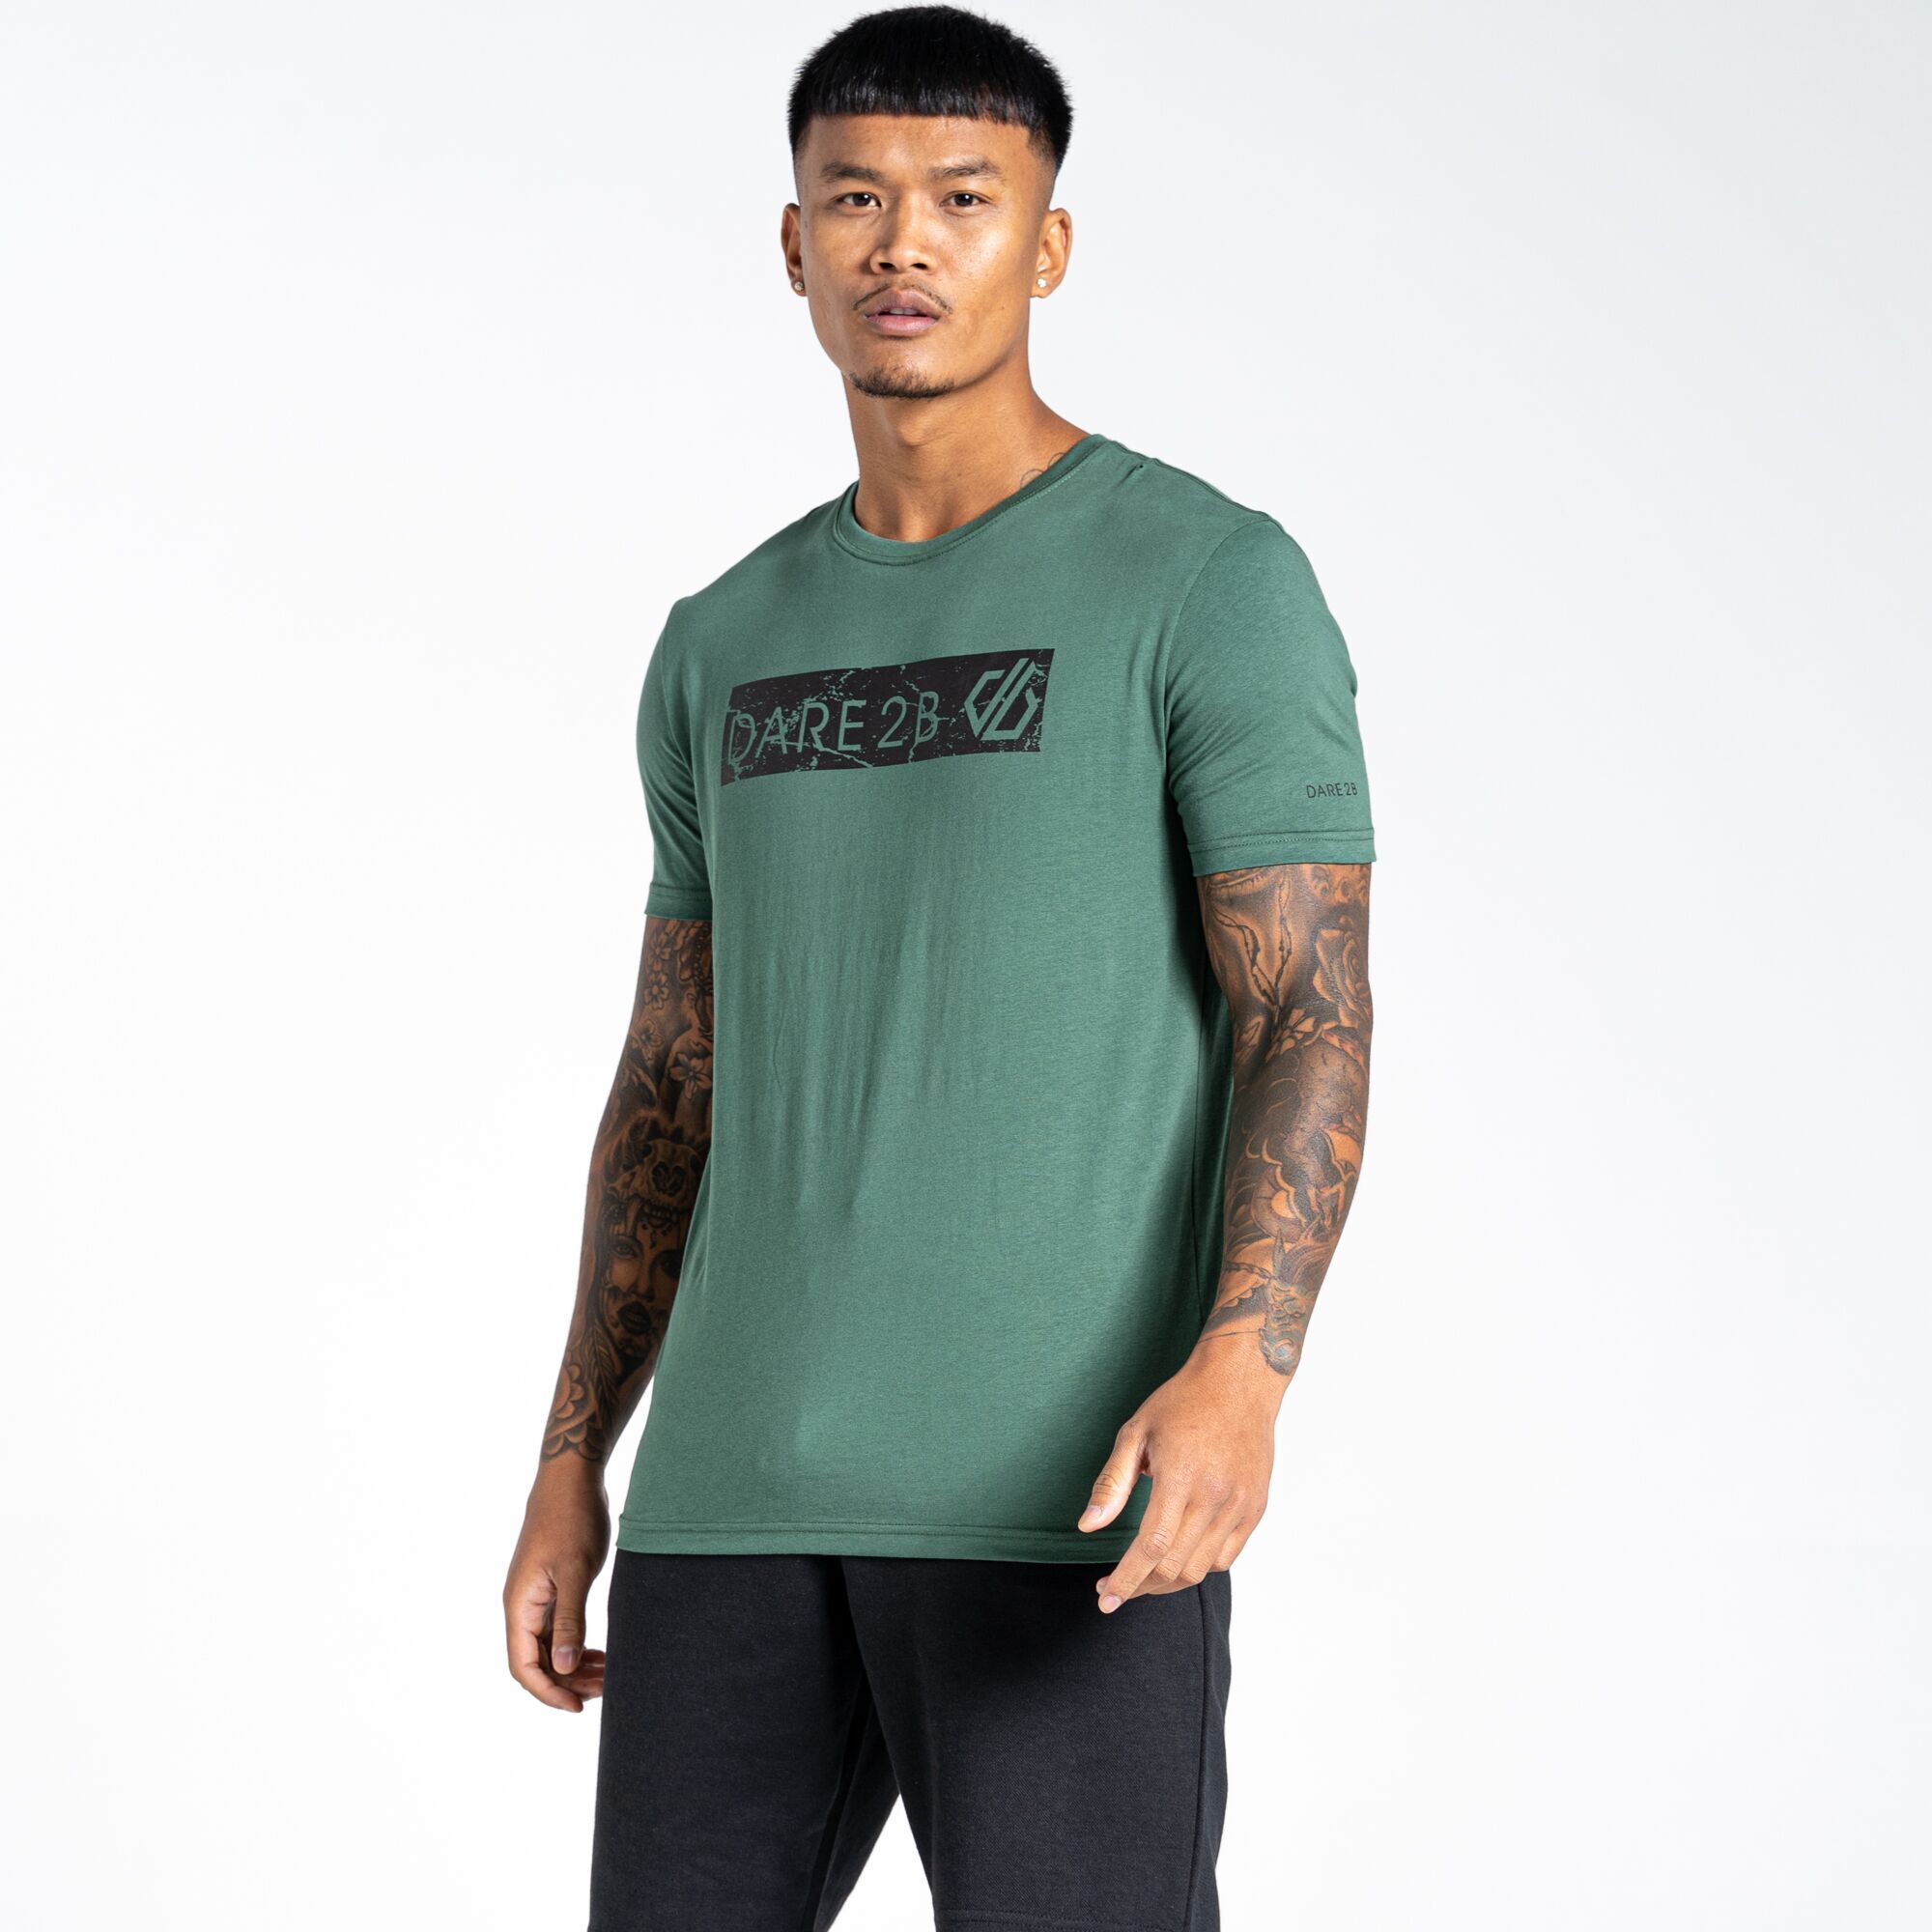 100% Organic Cotton. Fabric: Jersey, Soft Touch. Design: Logo, Plain, Rectangle. Neckline: Crew Neck, Ribbed Collar. Sleeve-Type: Short-Sleeved. Fabric Technology: Breathable, Lightweight.